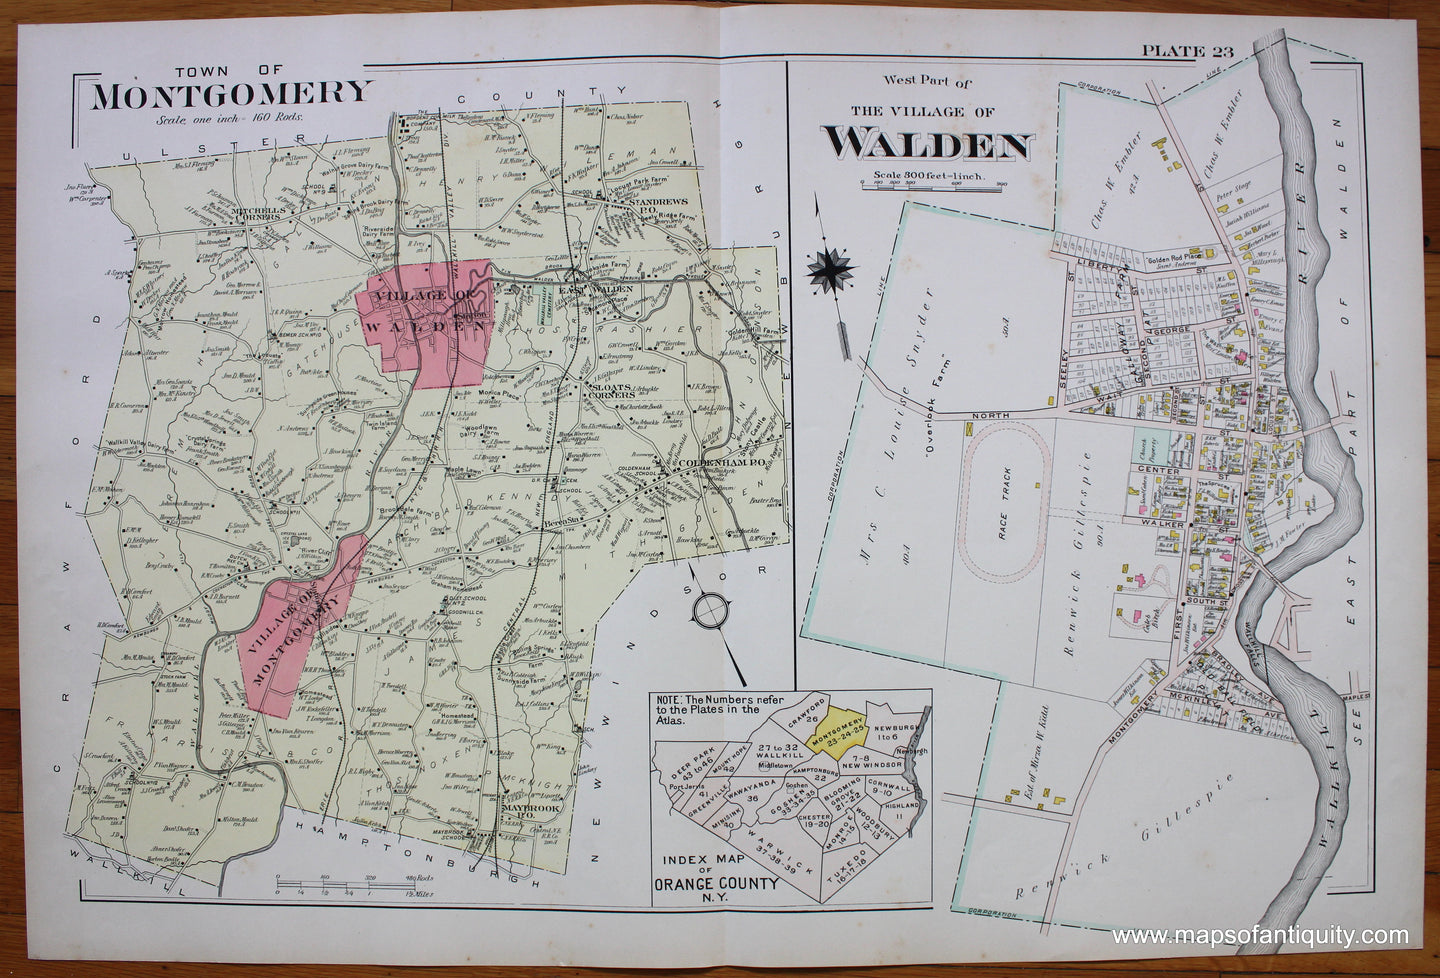 Antique-Printed-Color-Map-Town-of-Montgomery-West-Part-of-the-Village-of-Walden-NY-1903-Lathrop-/-A.-H.-Mueller-&-Co-New-York-1800s-19th-century-Maps-of-Antiquity